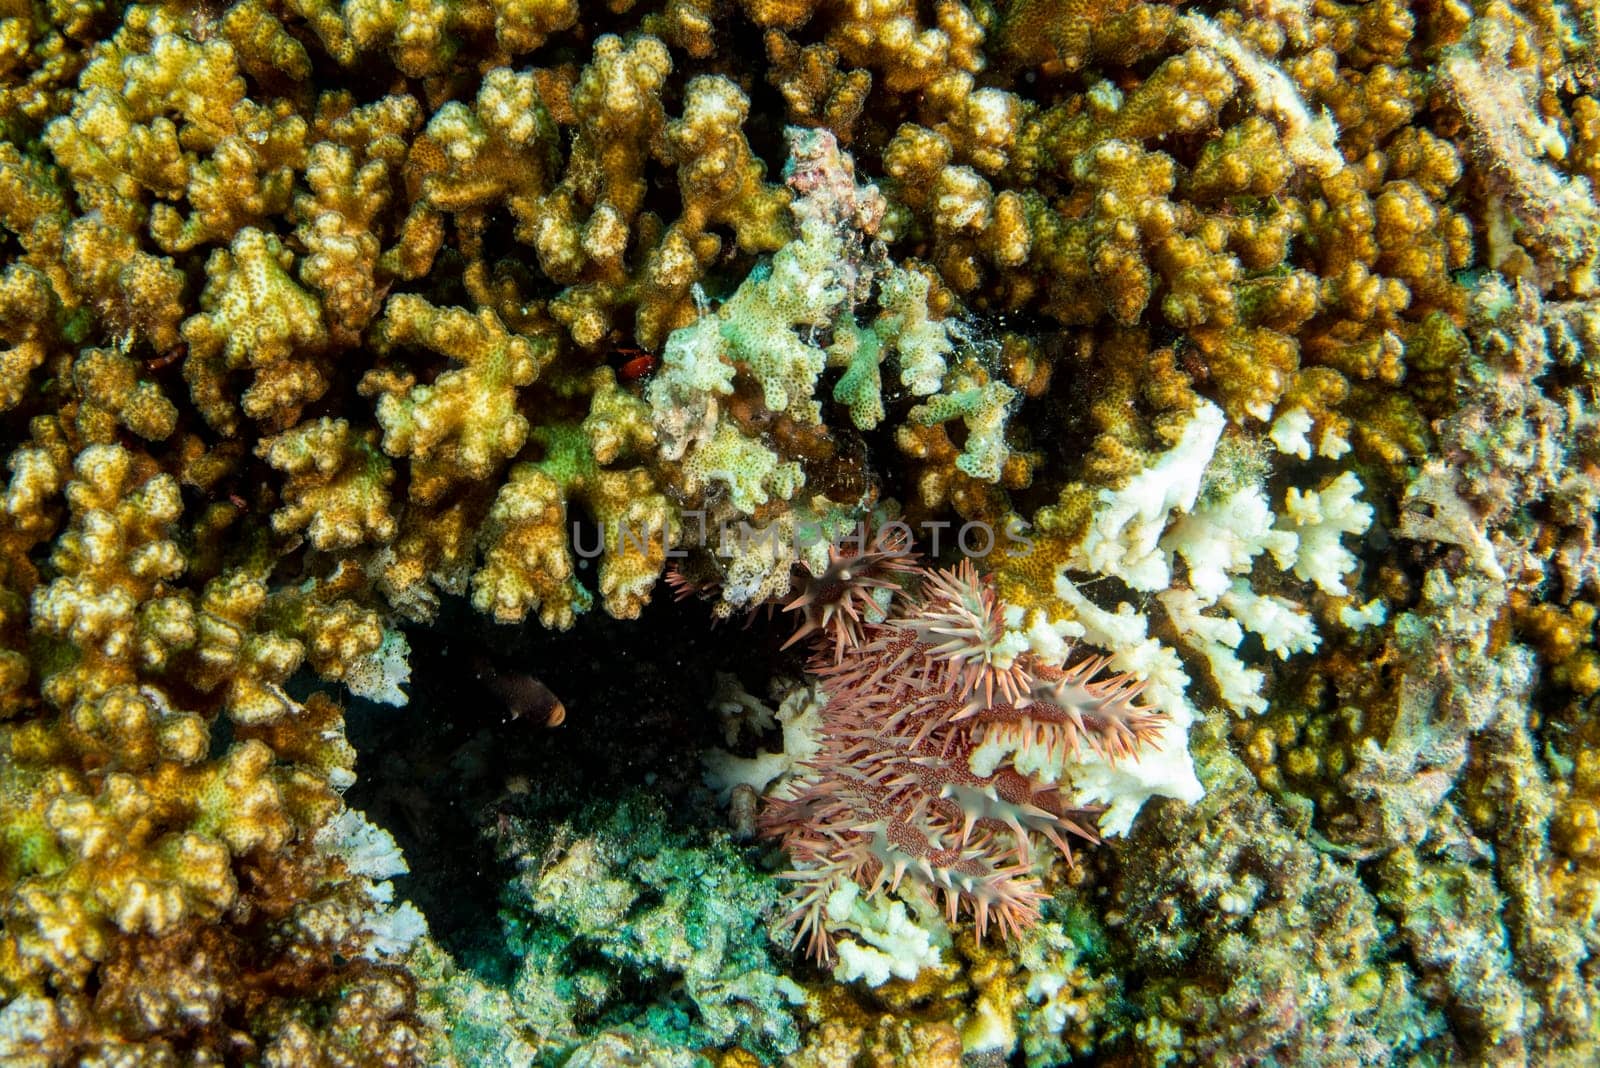 crown of thorns sea star eating a coral by AndreaIzzotti